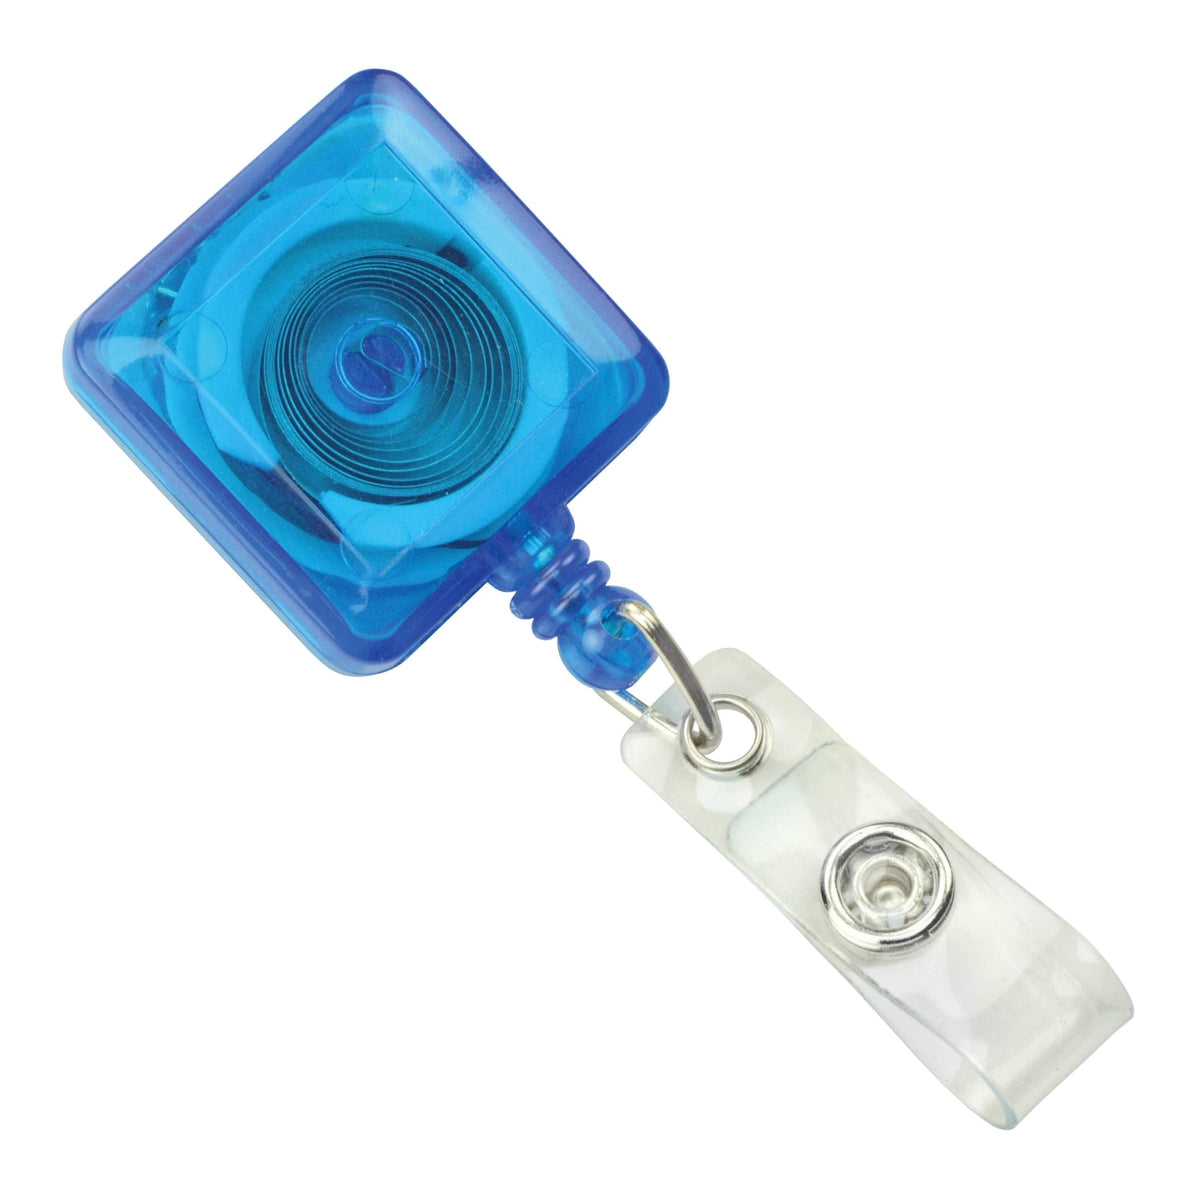 Translucent Blue Retractable Badge Reel With Spring Clip P/N 2120-5712 and  more ID Badge Holders at